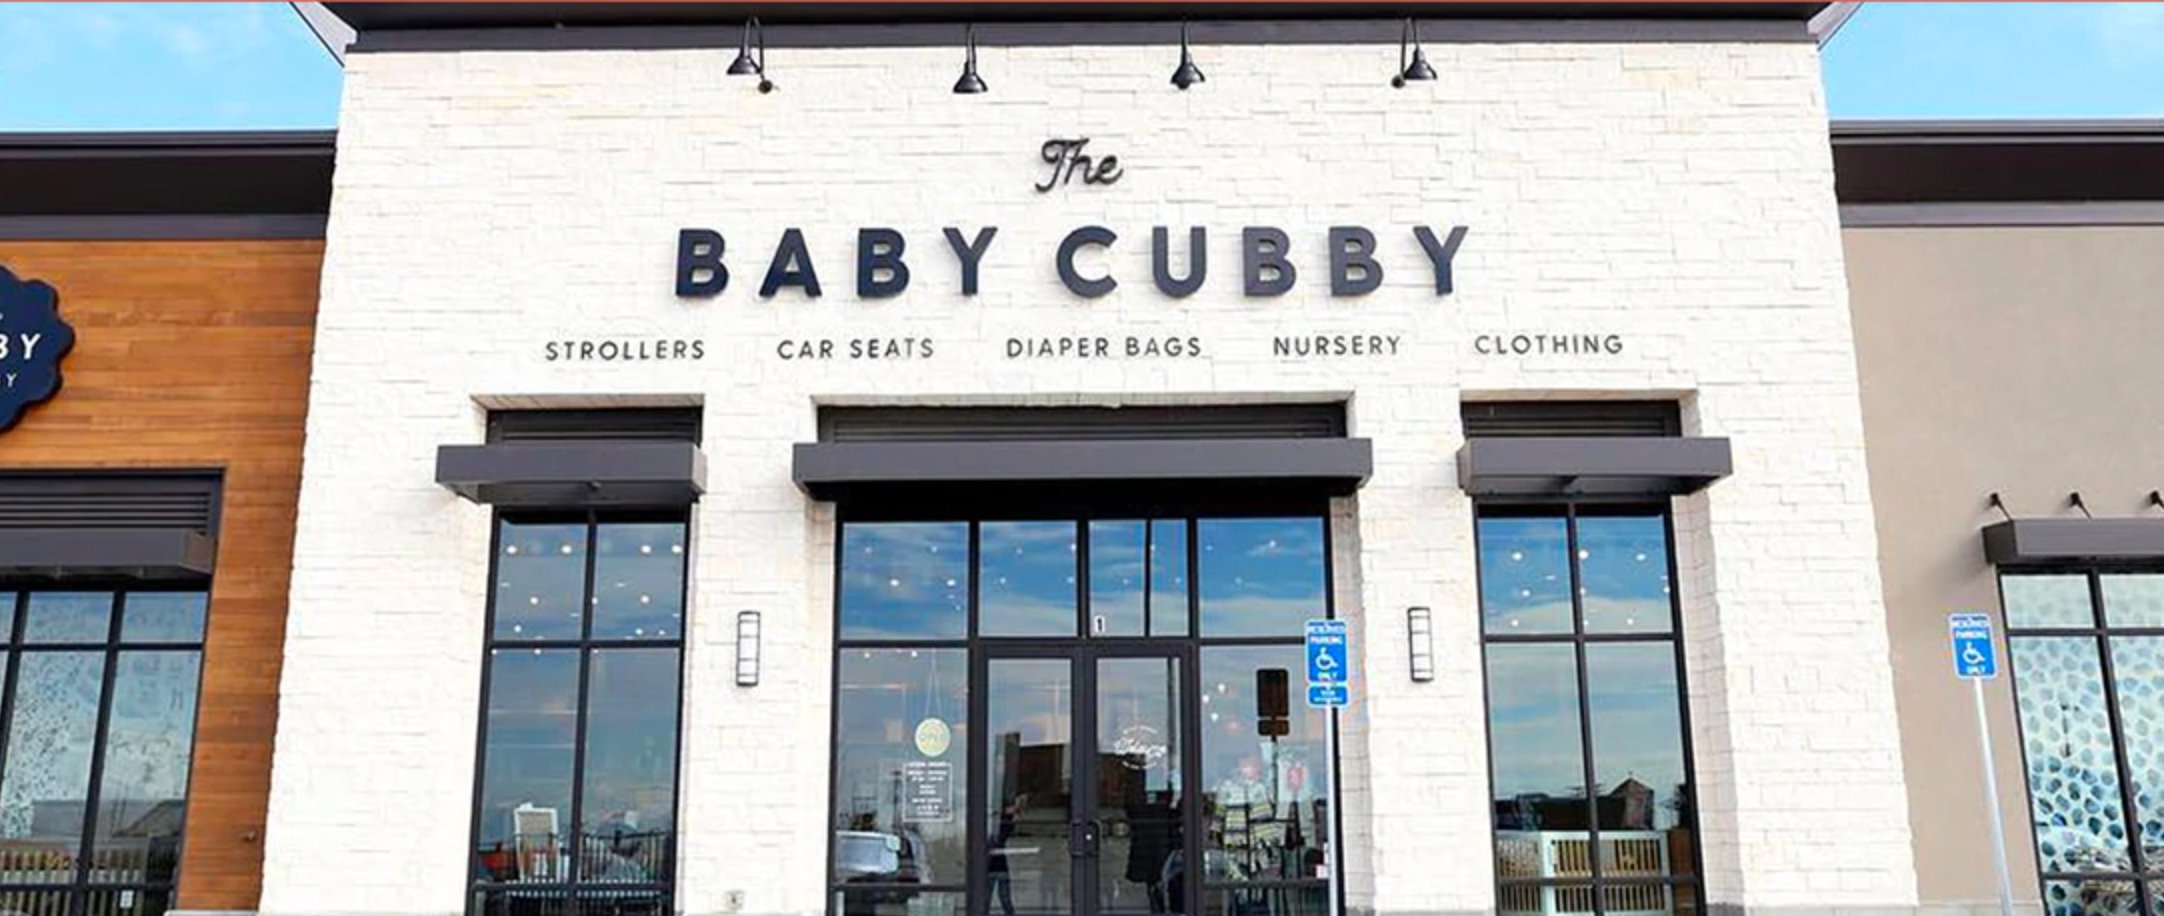 The Baby Cubby - UPPAbaby, Nuna, Doona, clothing, toys, and more!